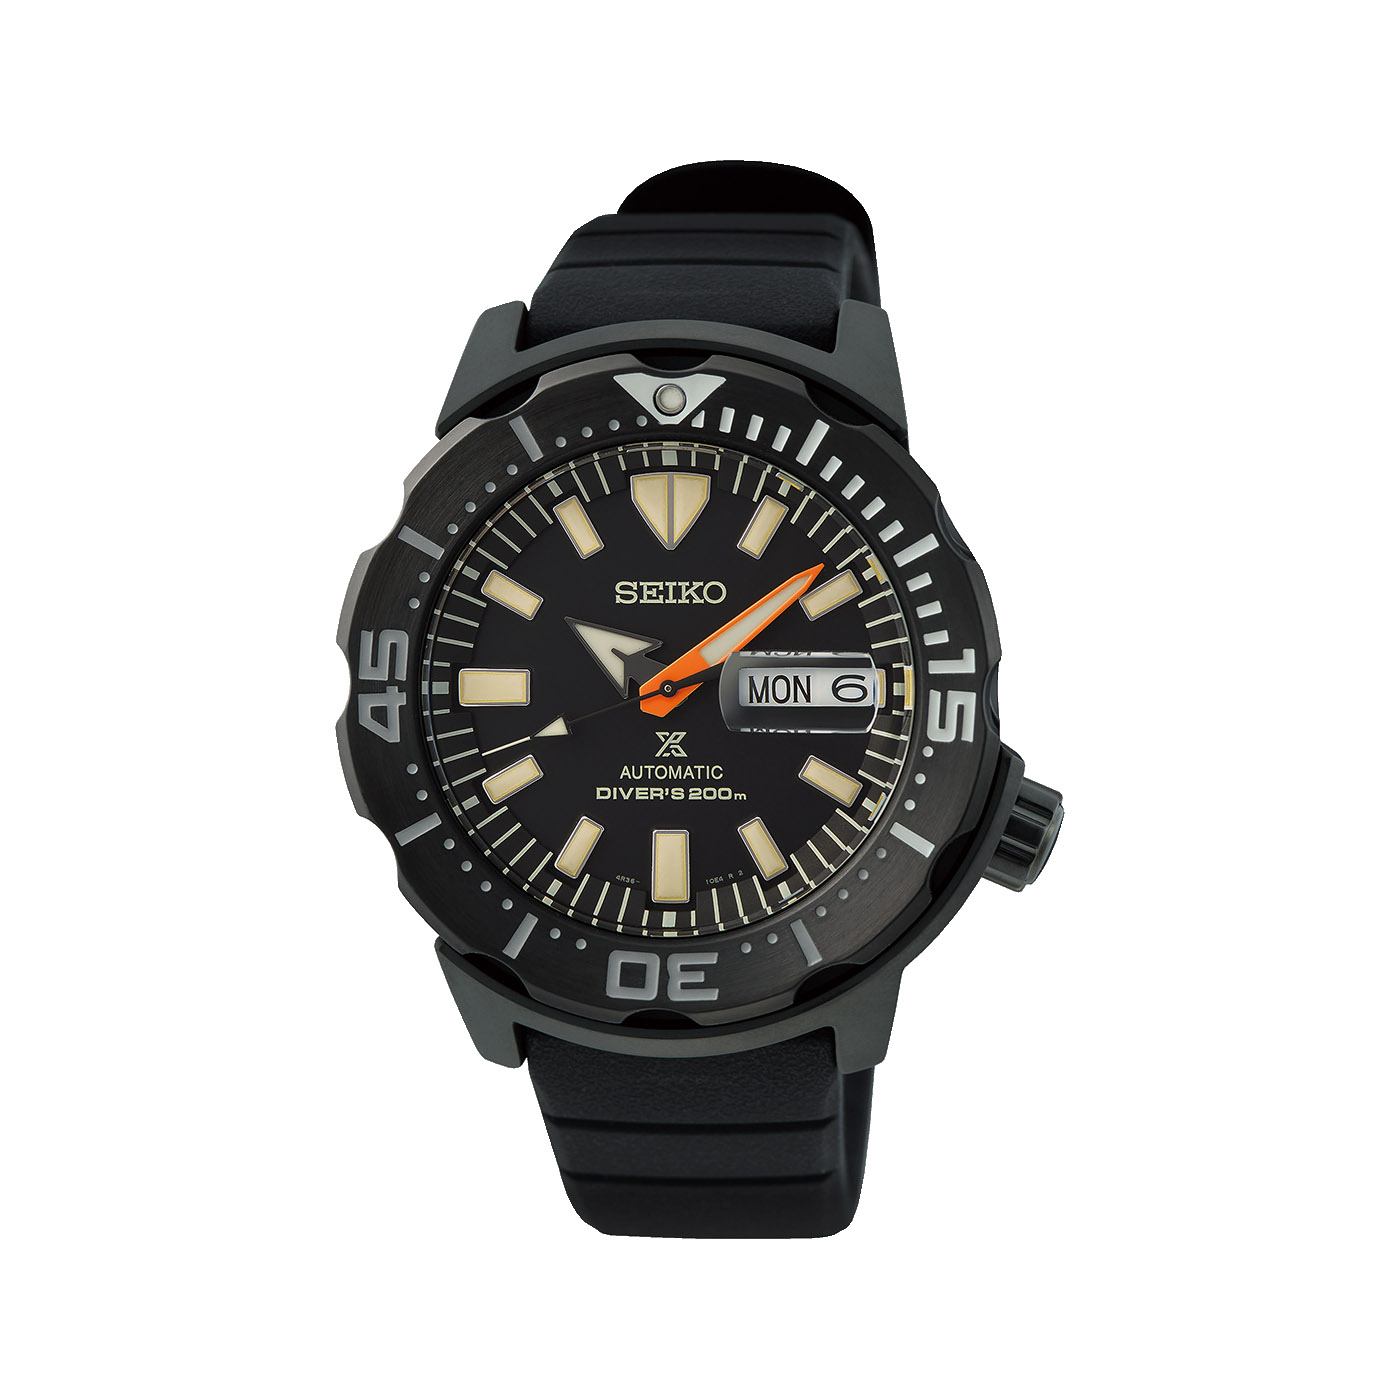 Seiko Monster Black Series Limited Edition